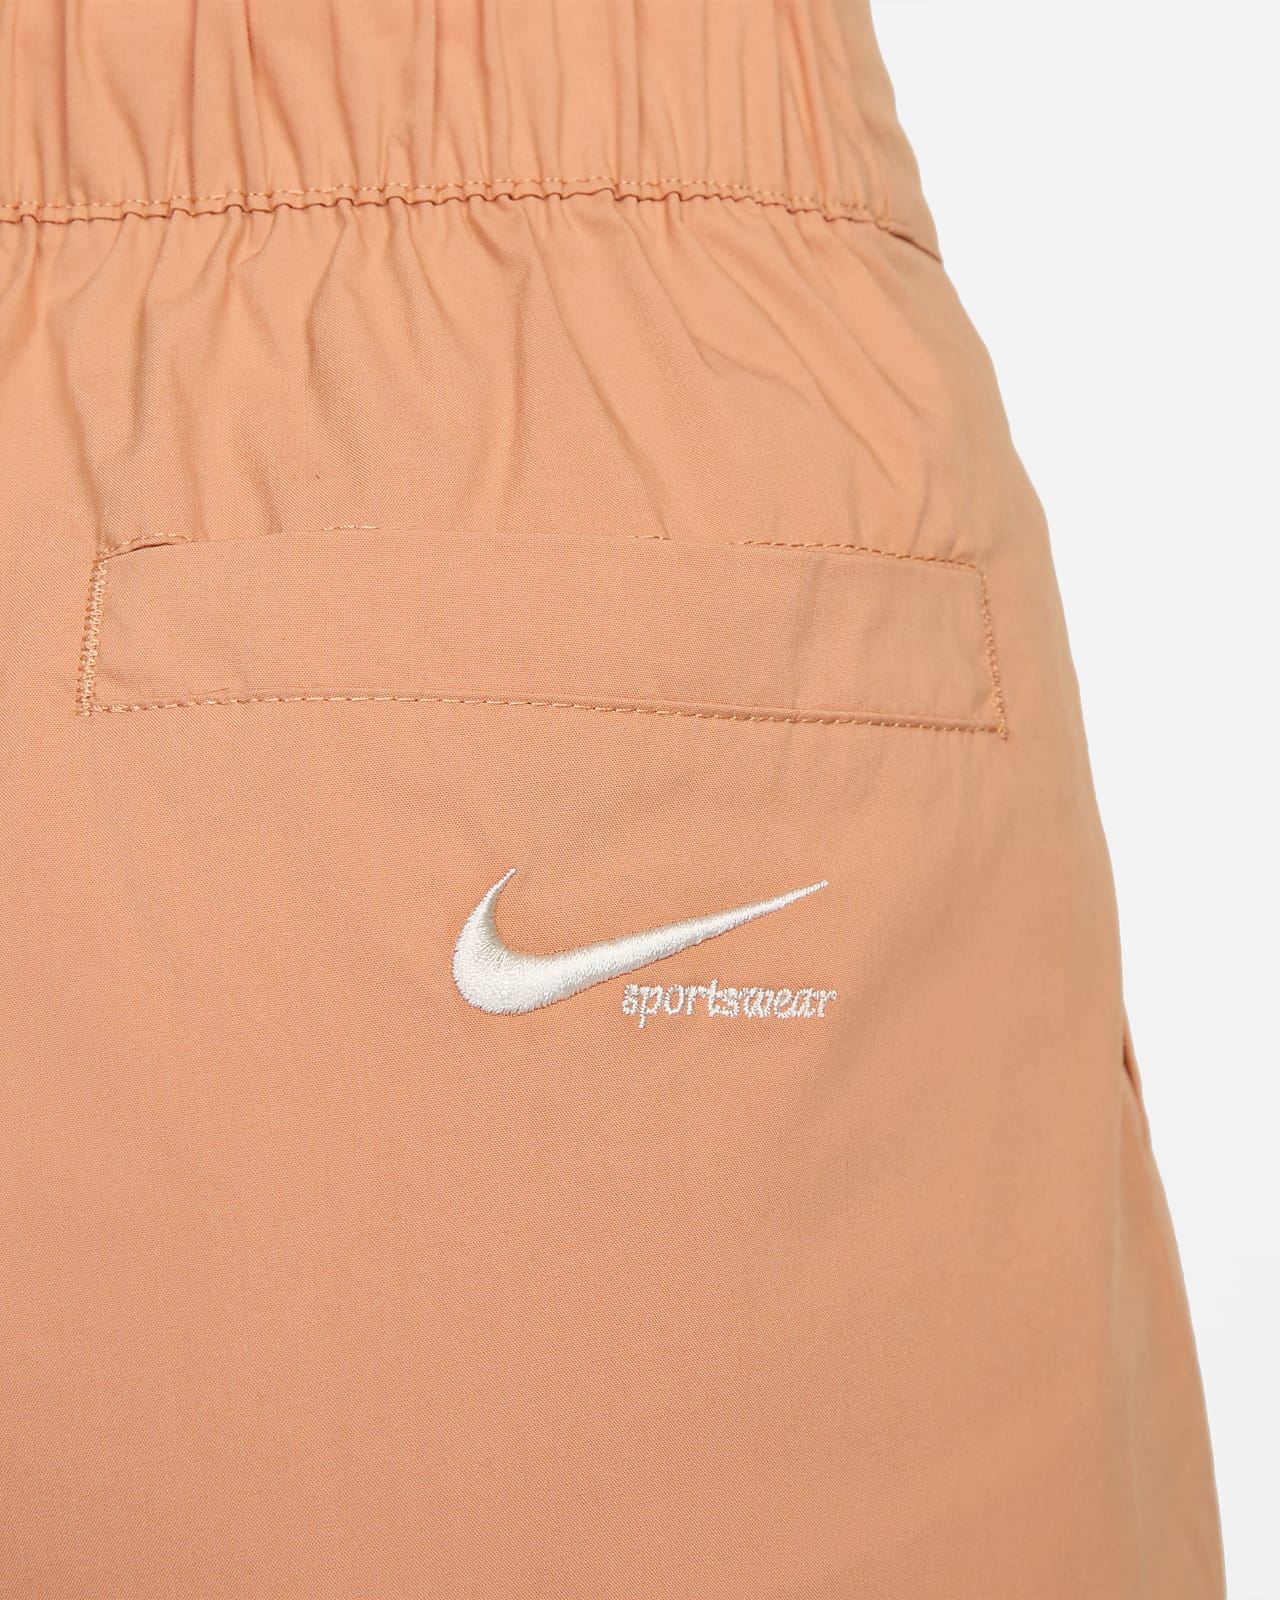 Nike/Nike women's pants 2022 summer new woven quick-drying casual sports  trousers DH6980-010-222